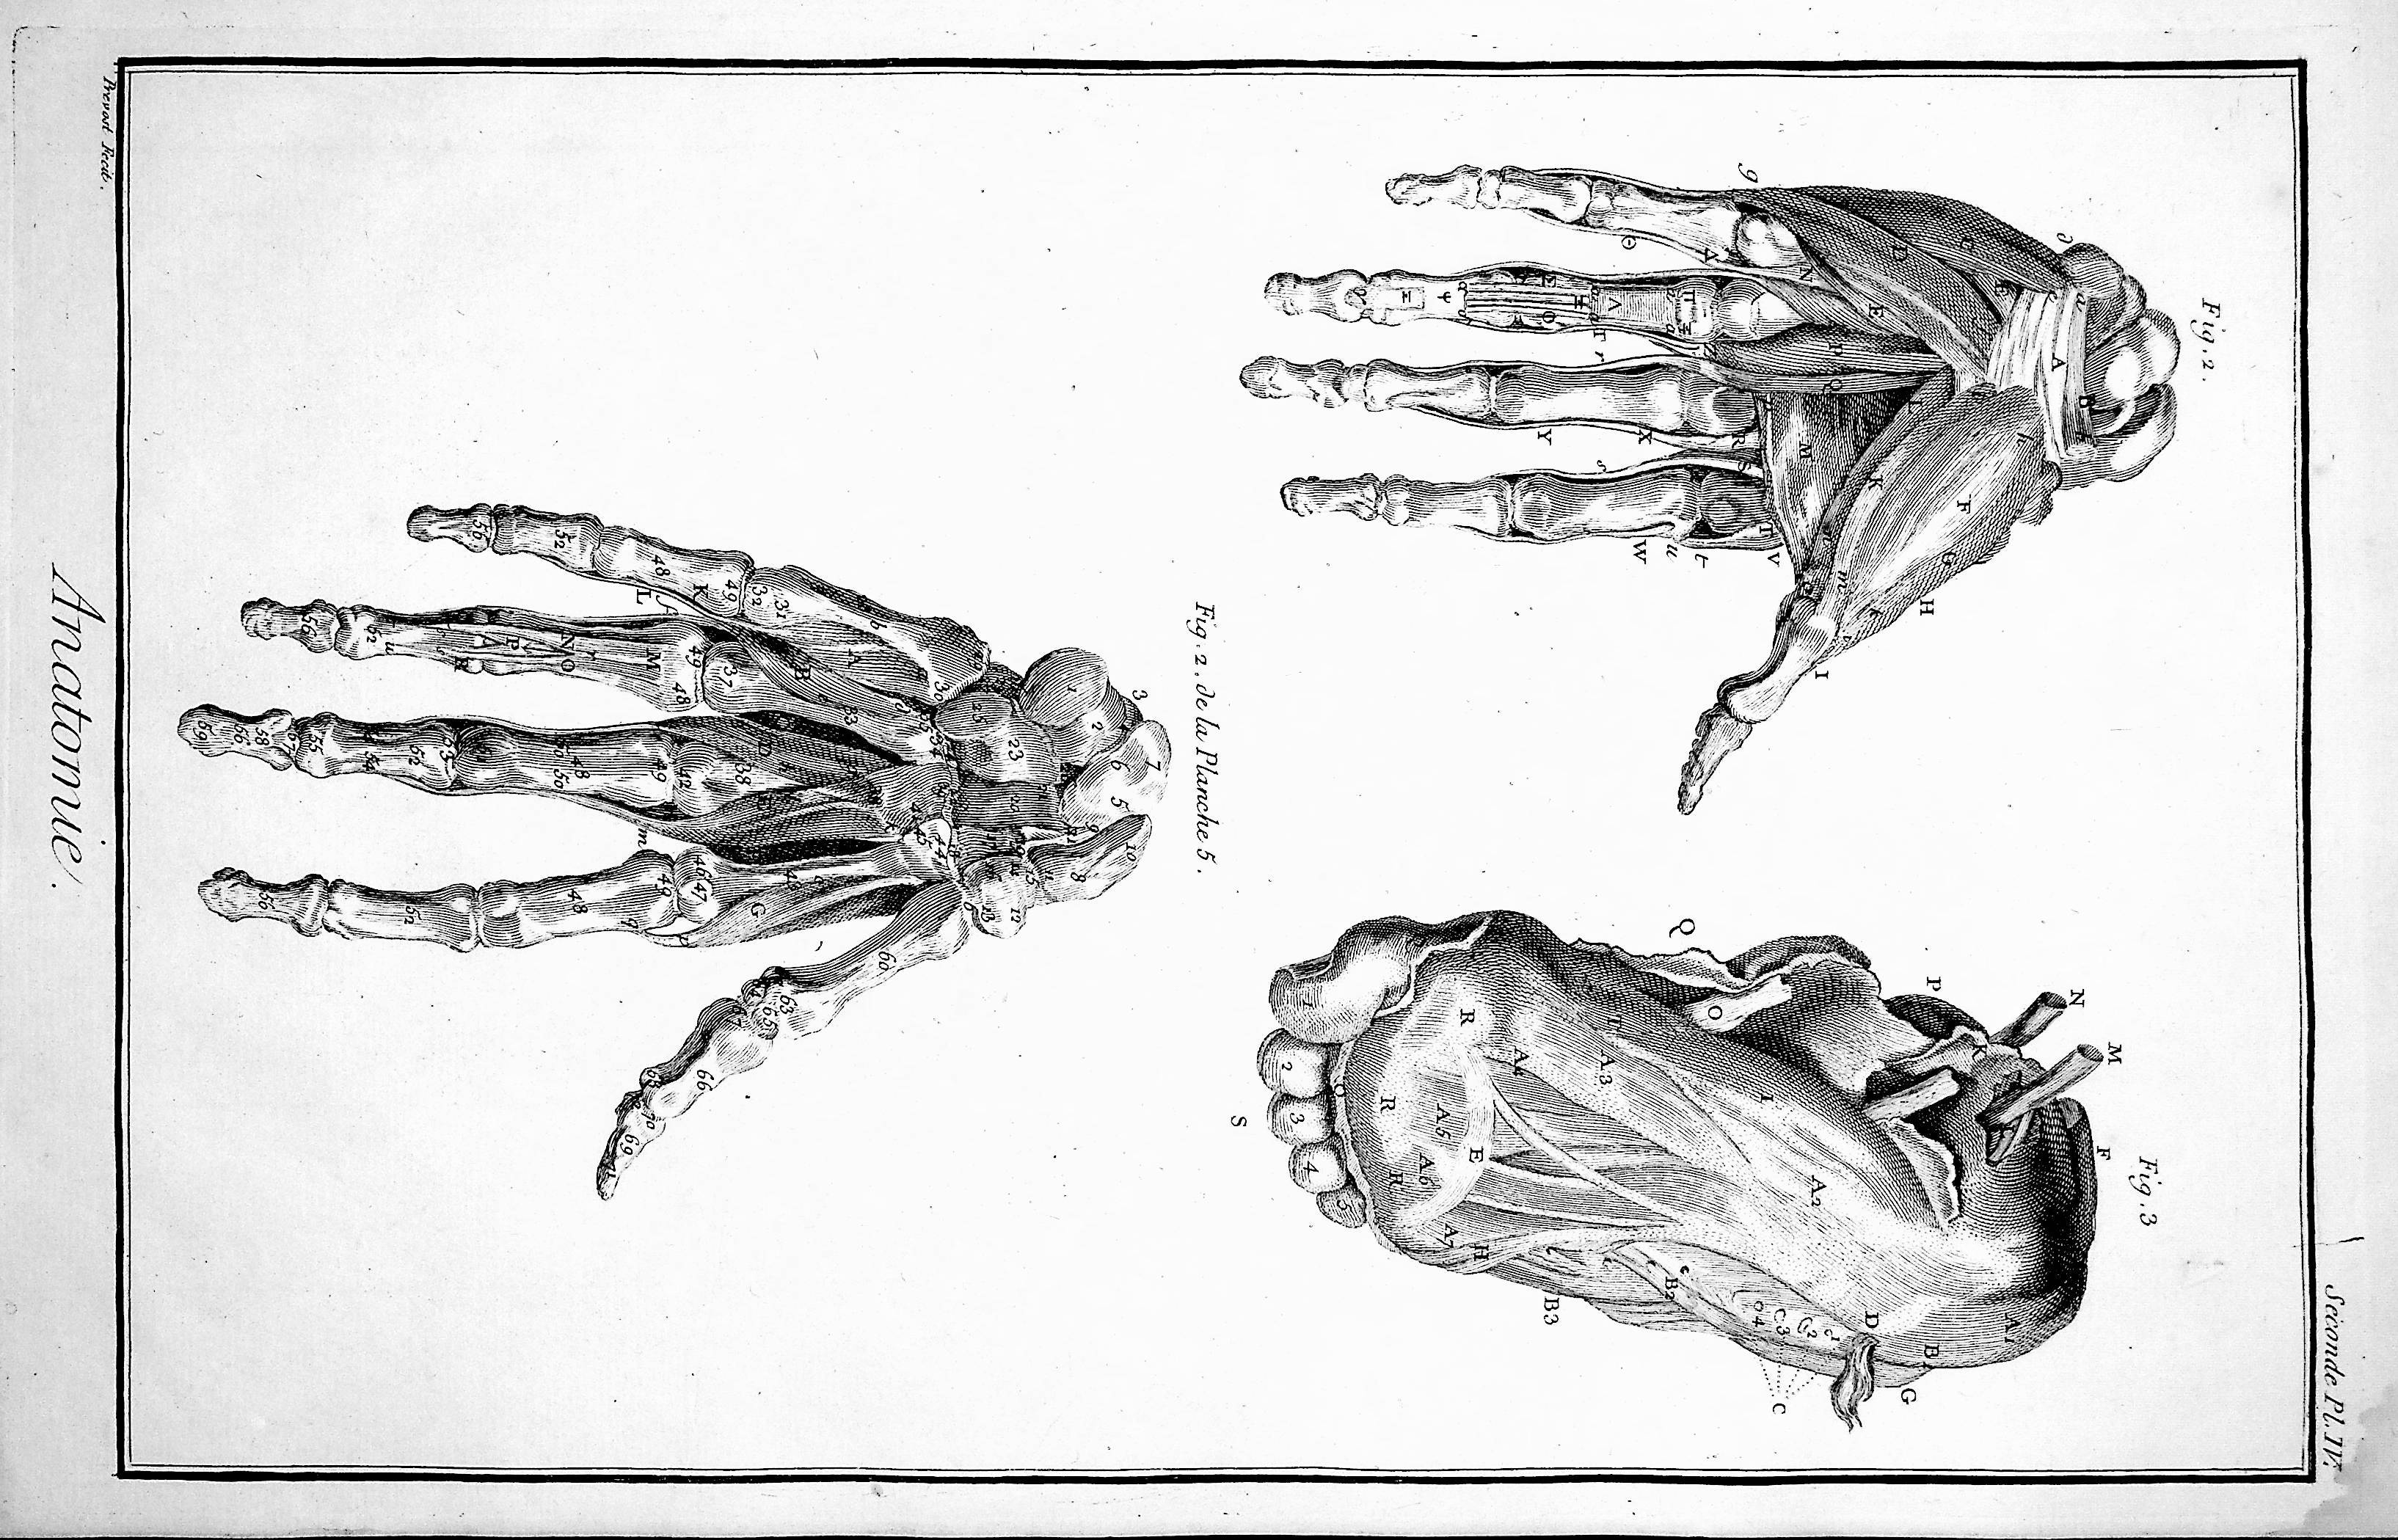 Image for Encyclopedie, Anatomie Plate IV No 2. Hands and feet dissected; TOGETHER WITH Plate VI. The muscles of feet and hands, after Albinus & Courcelles